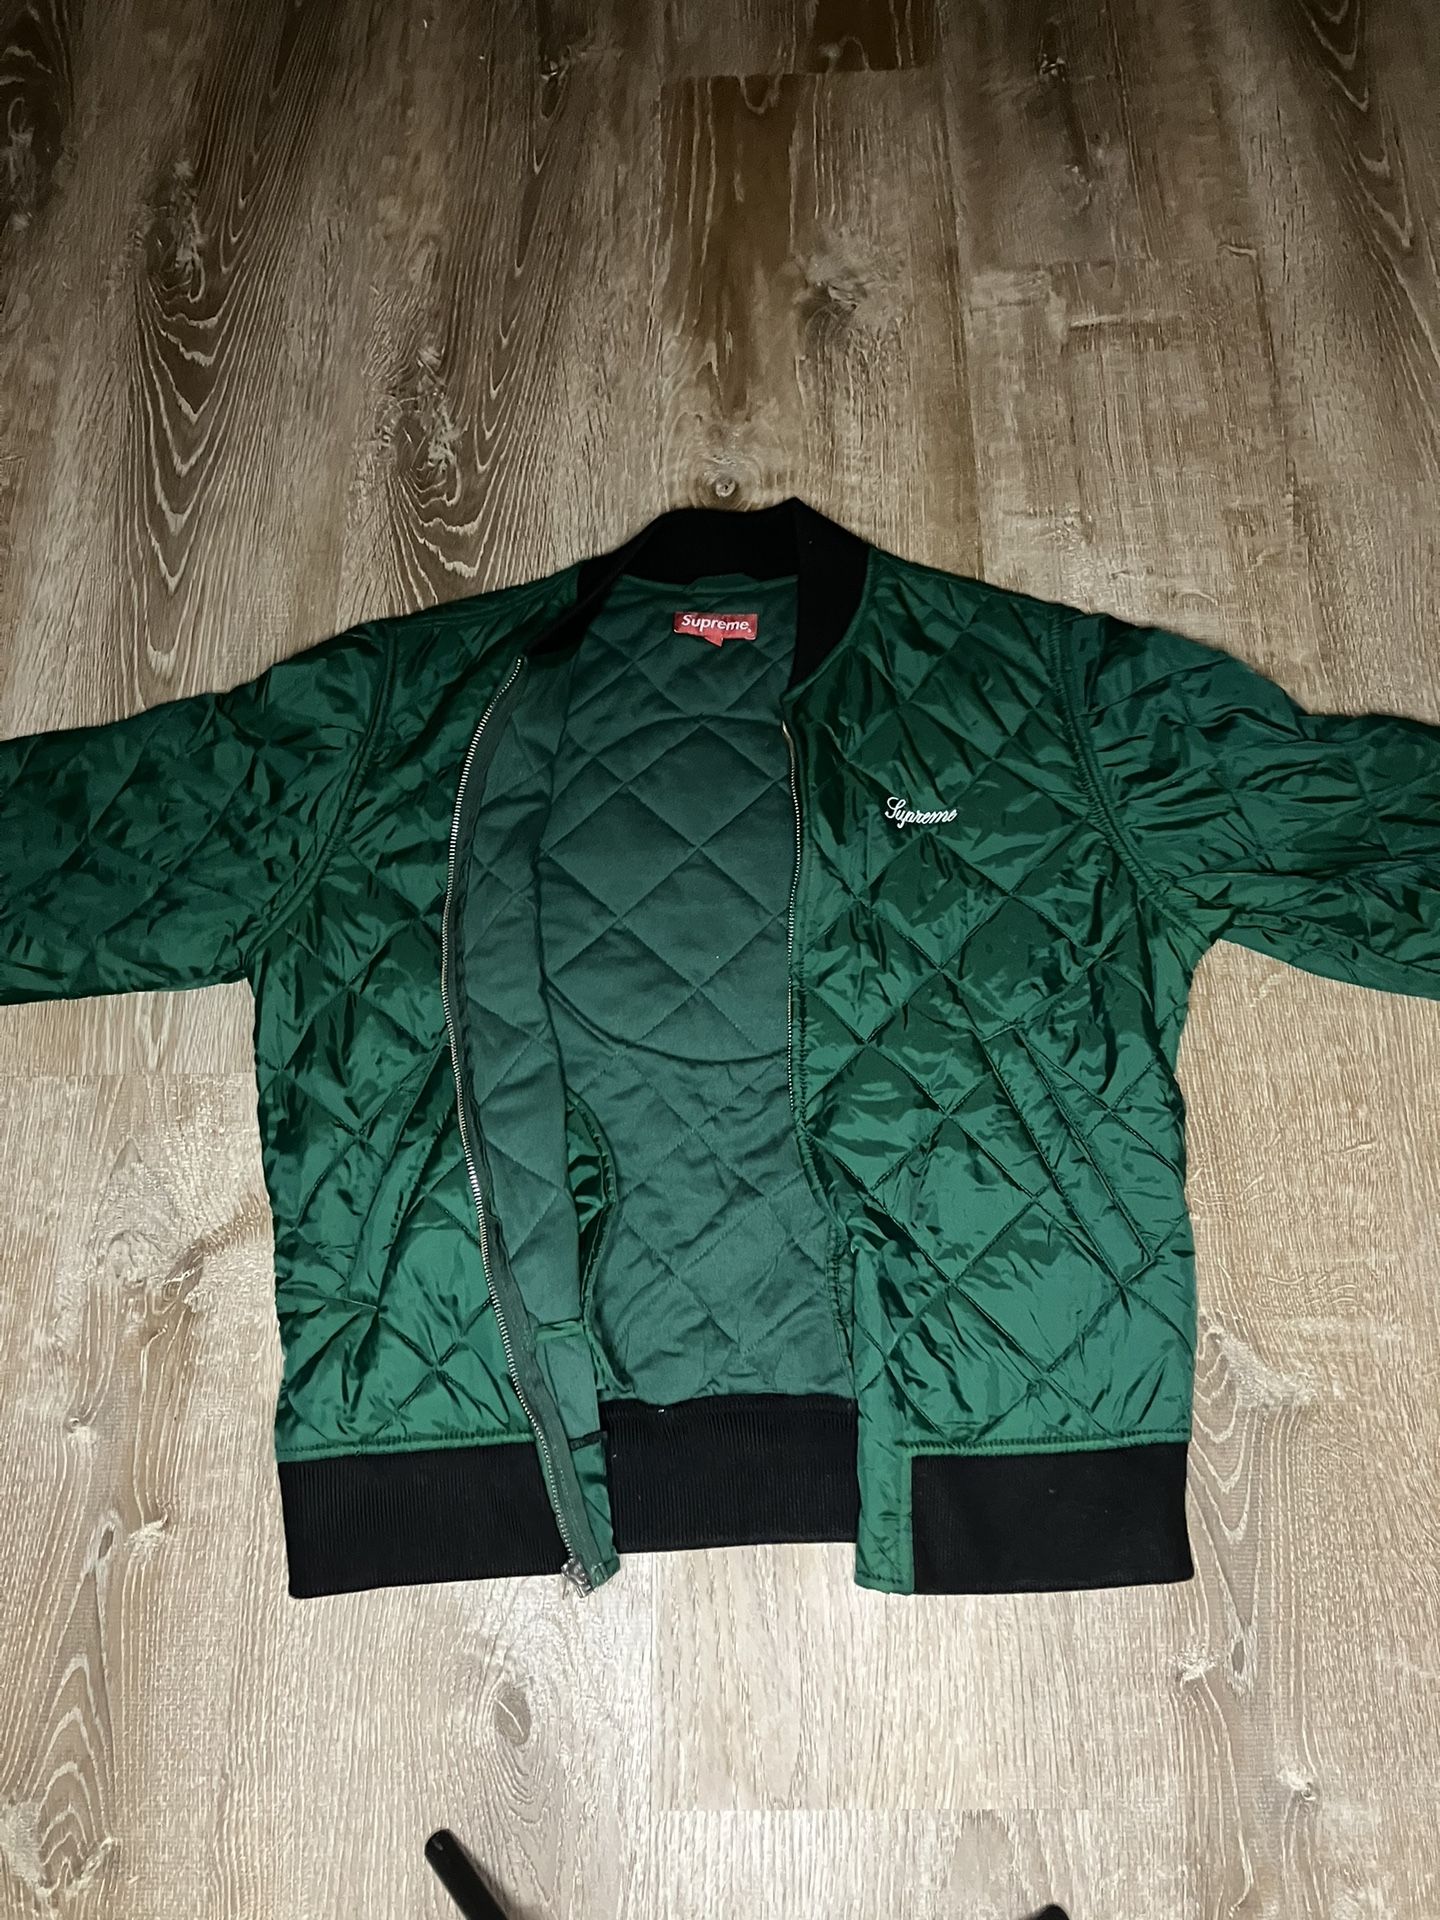 Supreme Sequin Patch Quilted Bomber Jacket Pine Green- Size Medium